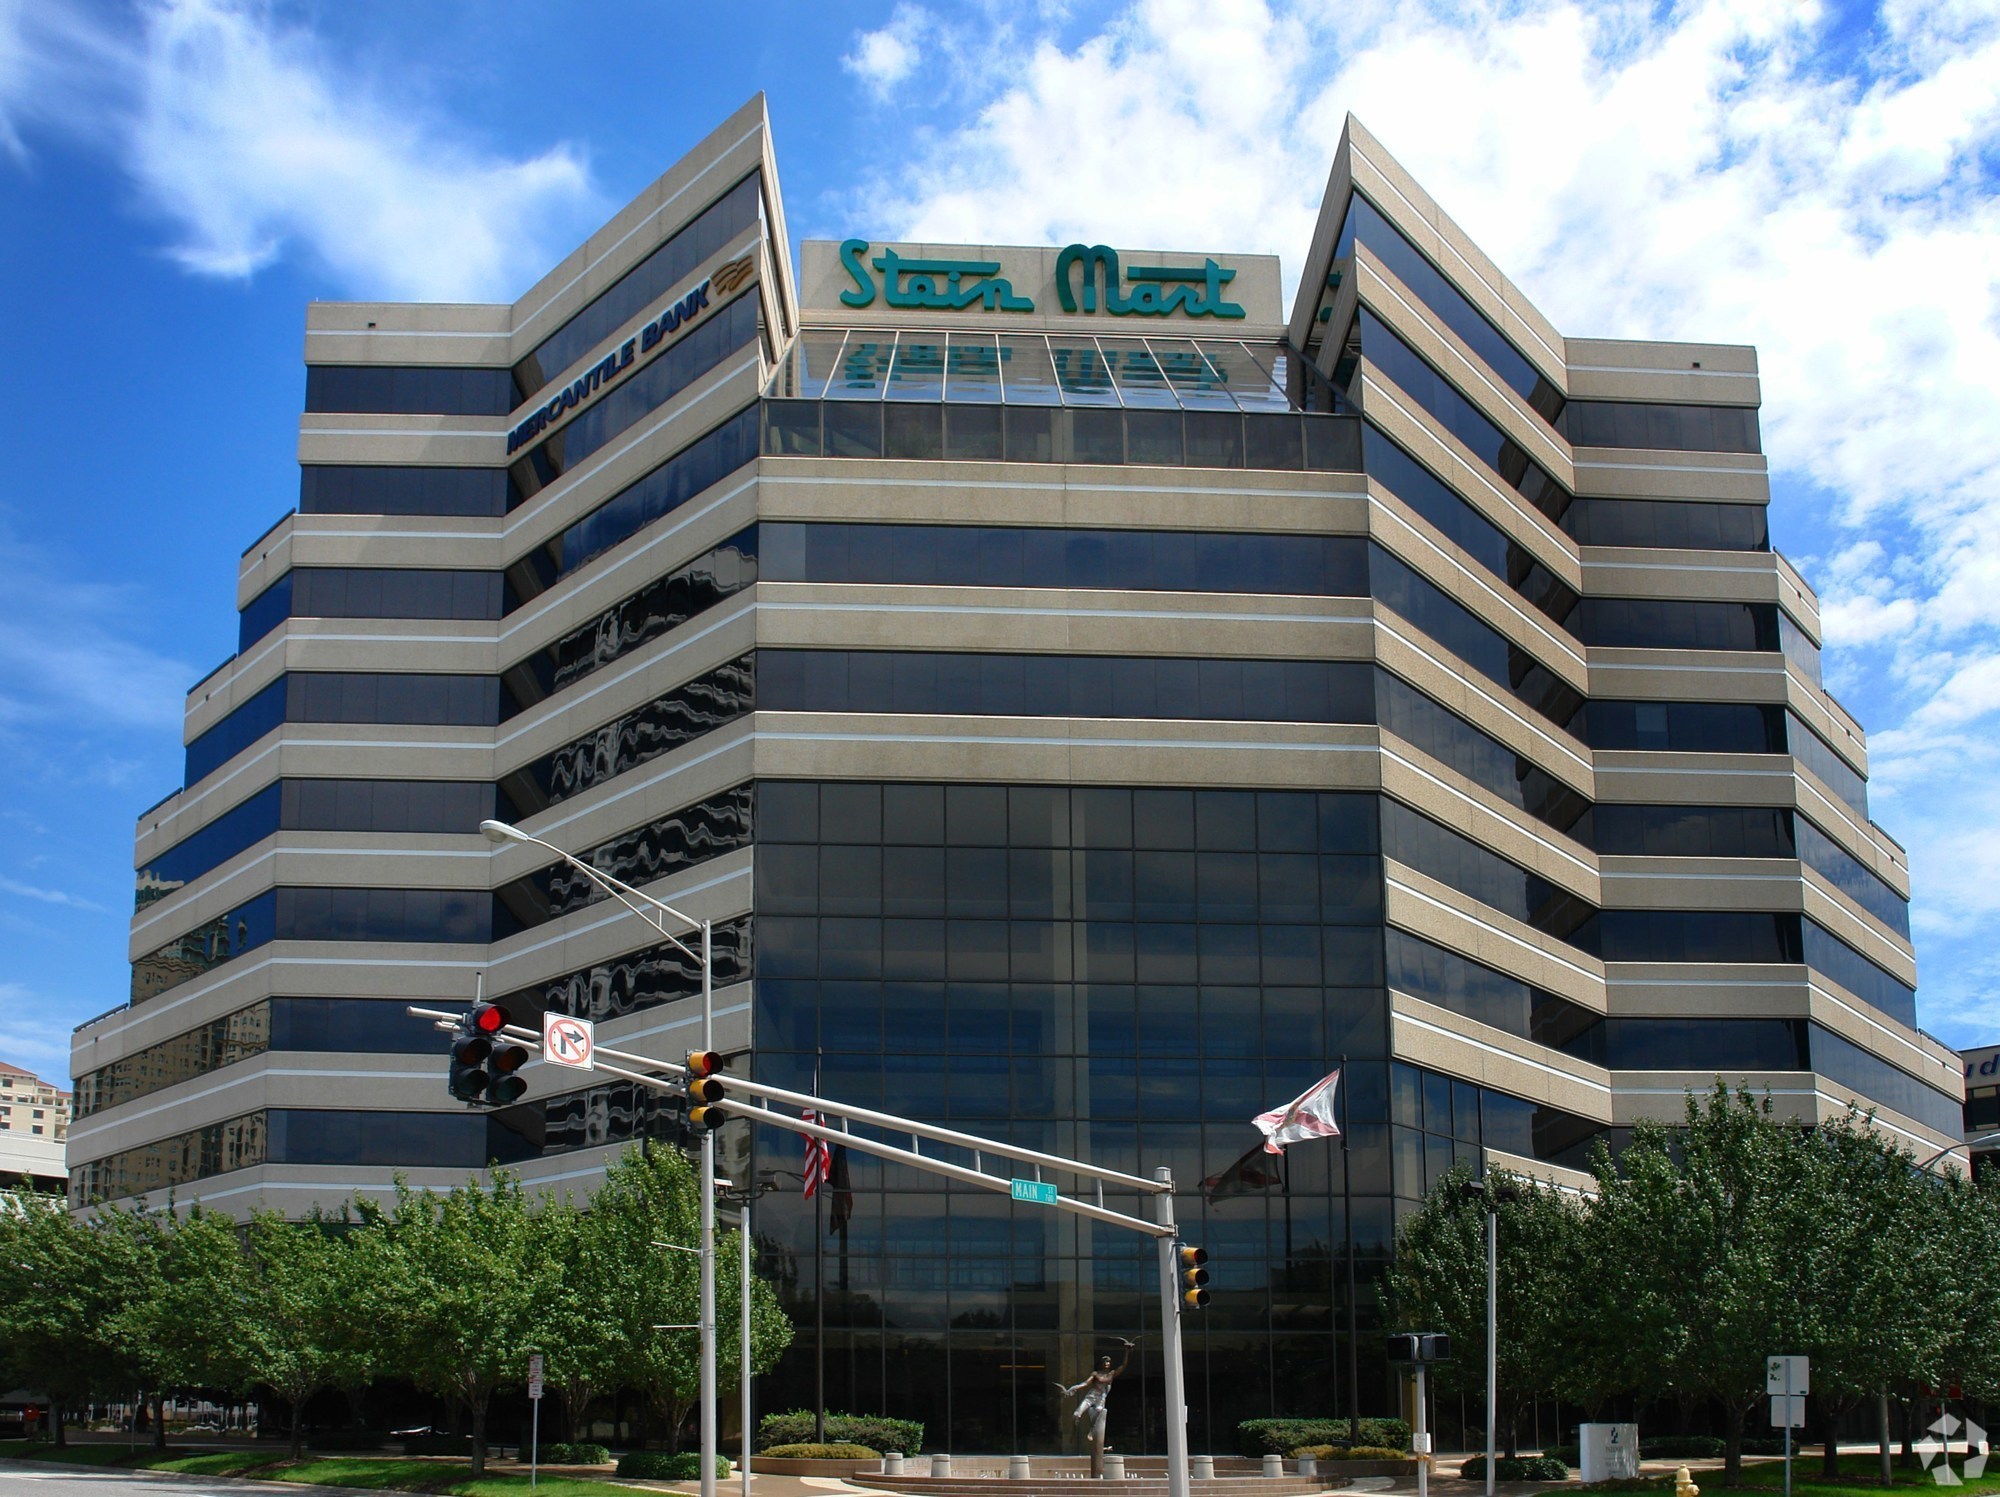 The Stein Mart headquarters at 1200 Riverplace Blvd. on the Downtown Southbank.